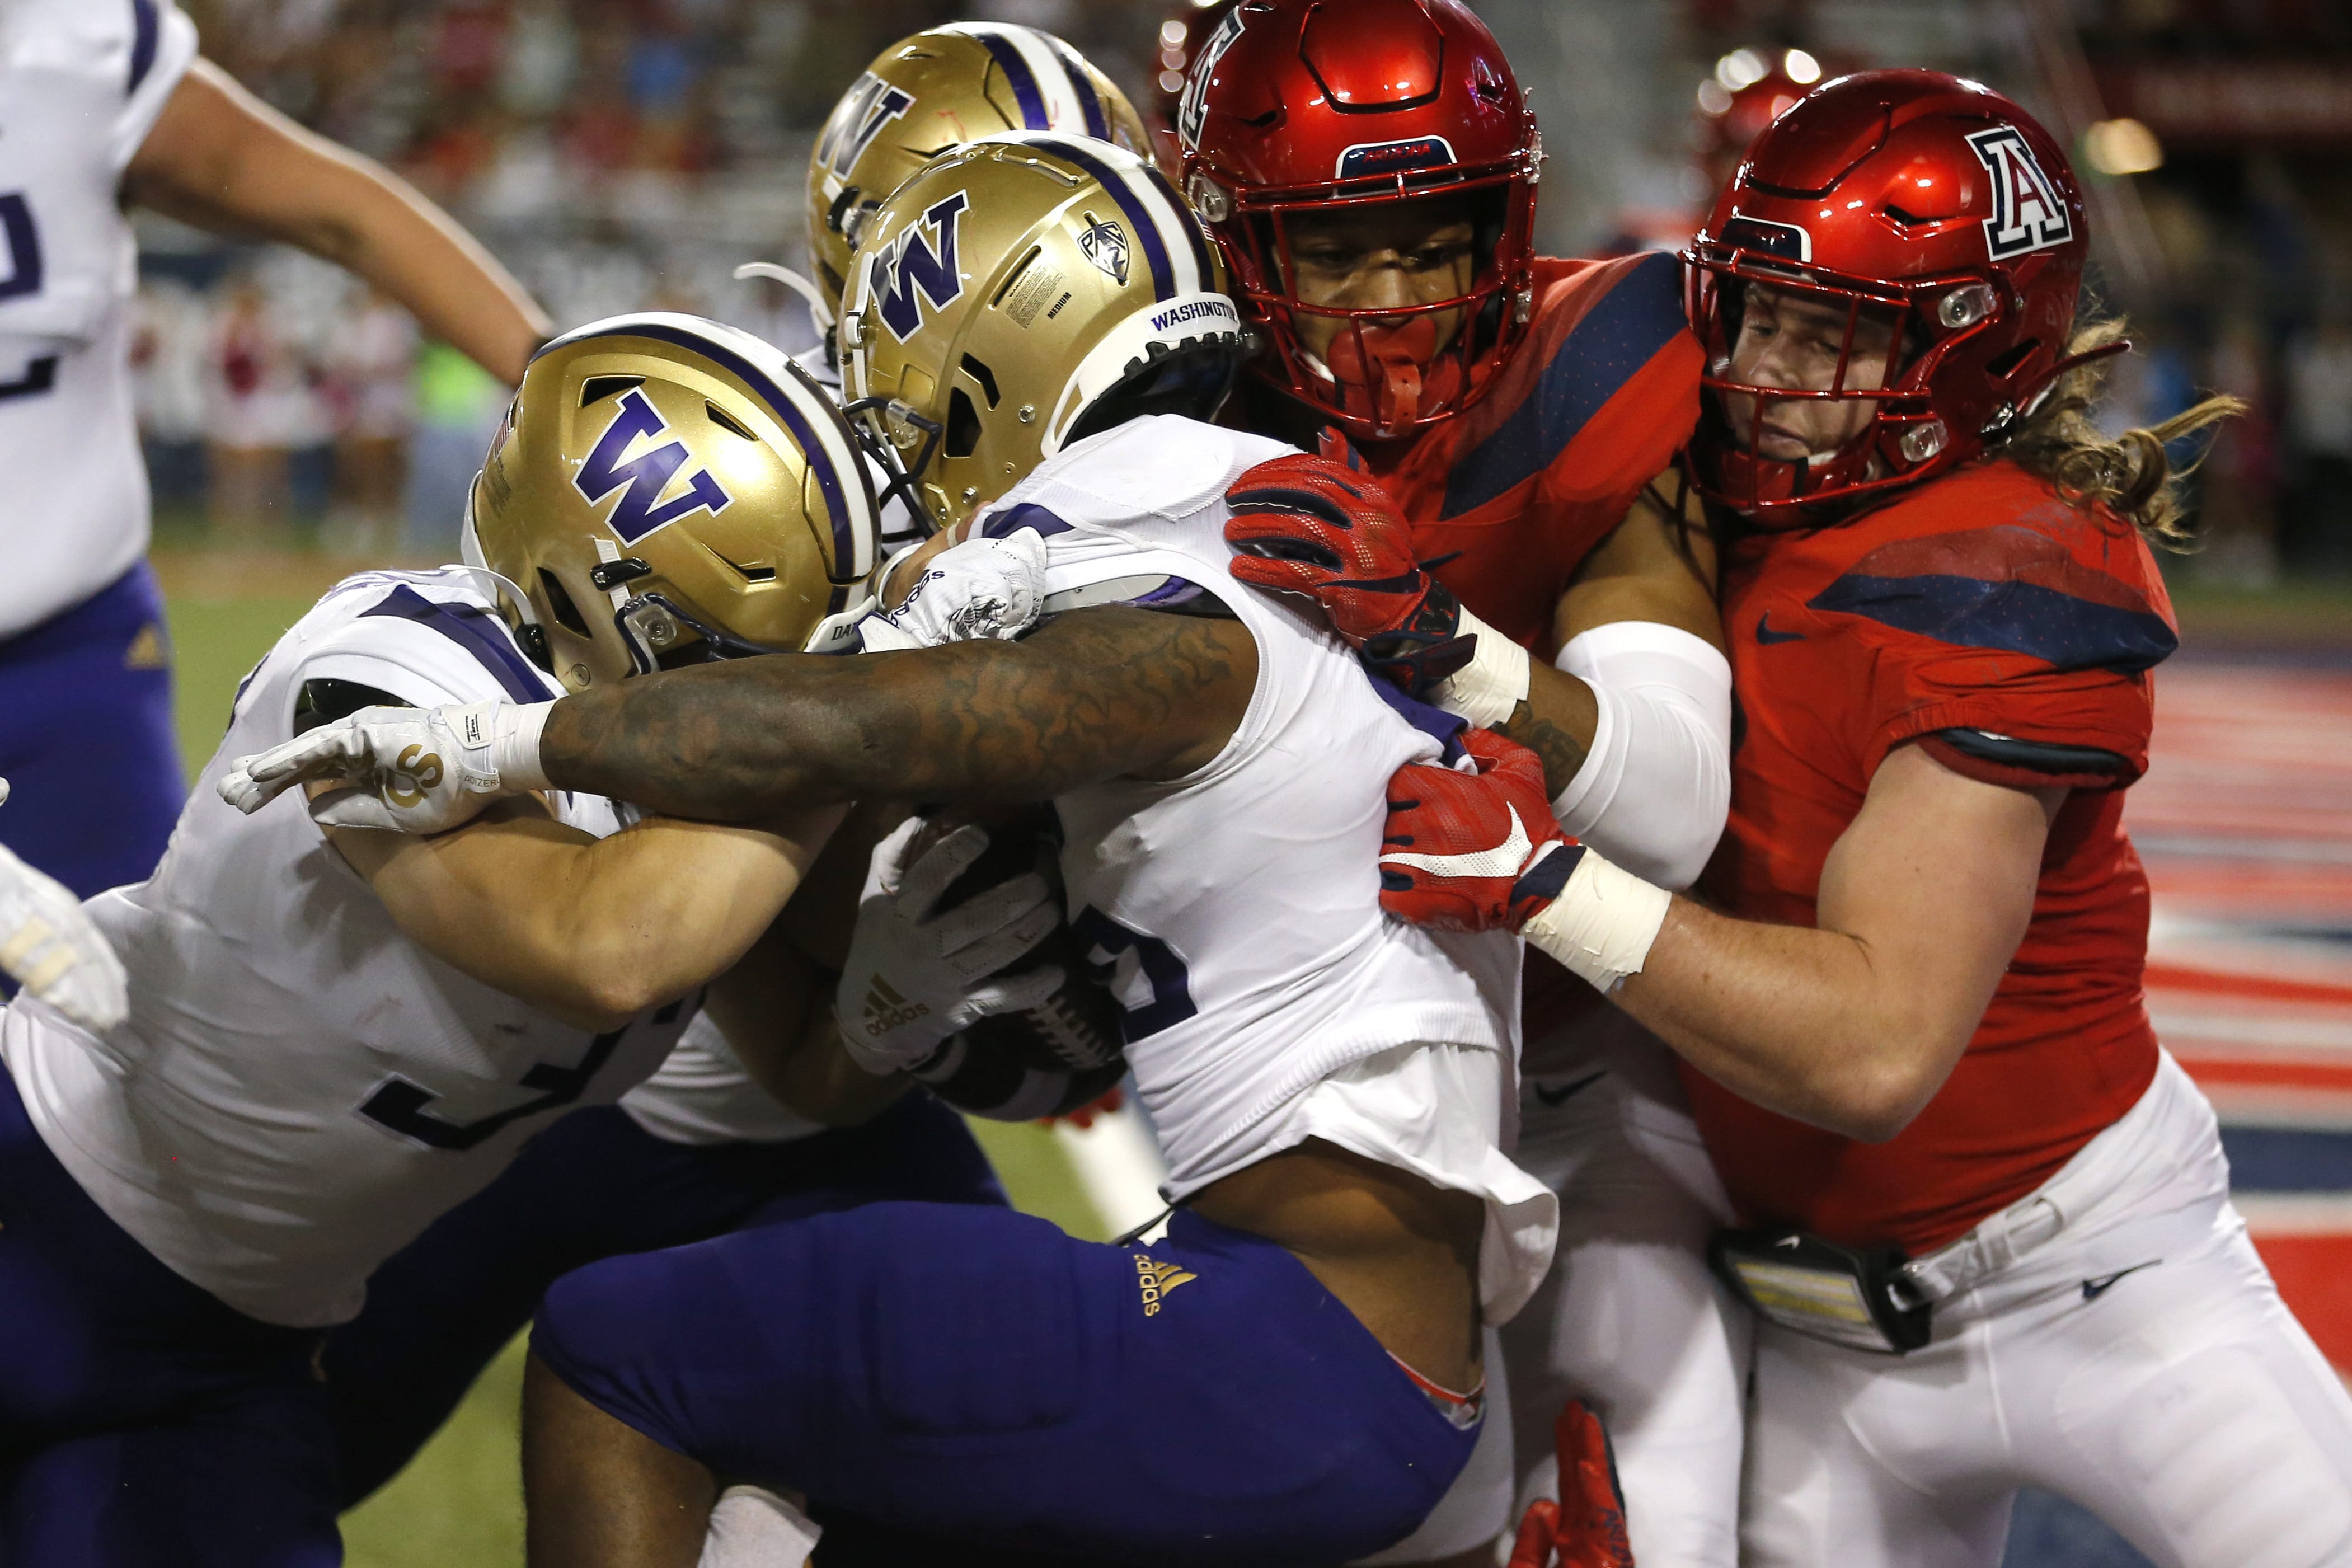 Washington running back Salvon Ahmed, middle, gets pushed into the endzone for a touchdown against Washington in the second half during an NCAA college football game, Saturday, Oct. 12, 2019, in Tucson, Ariz.